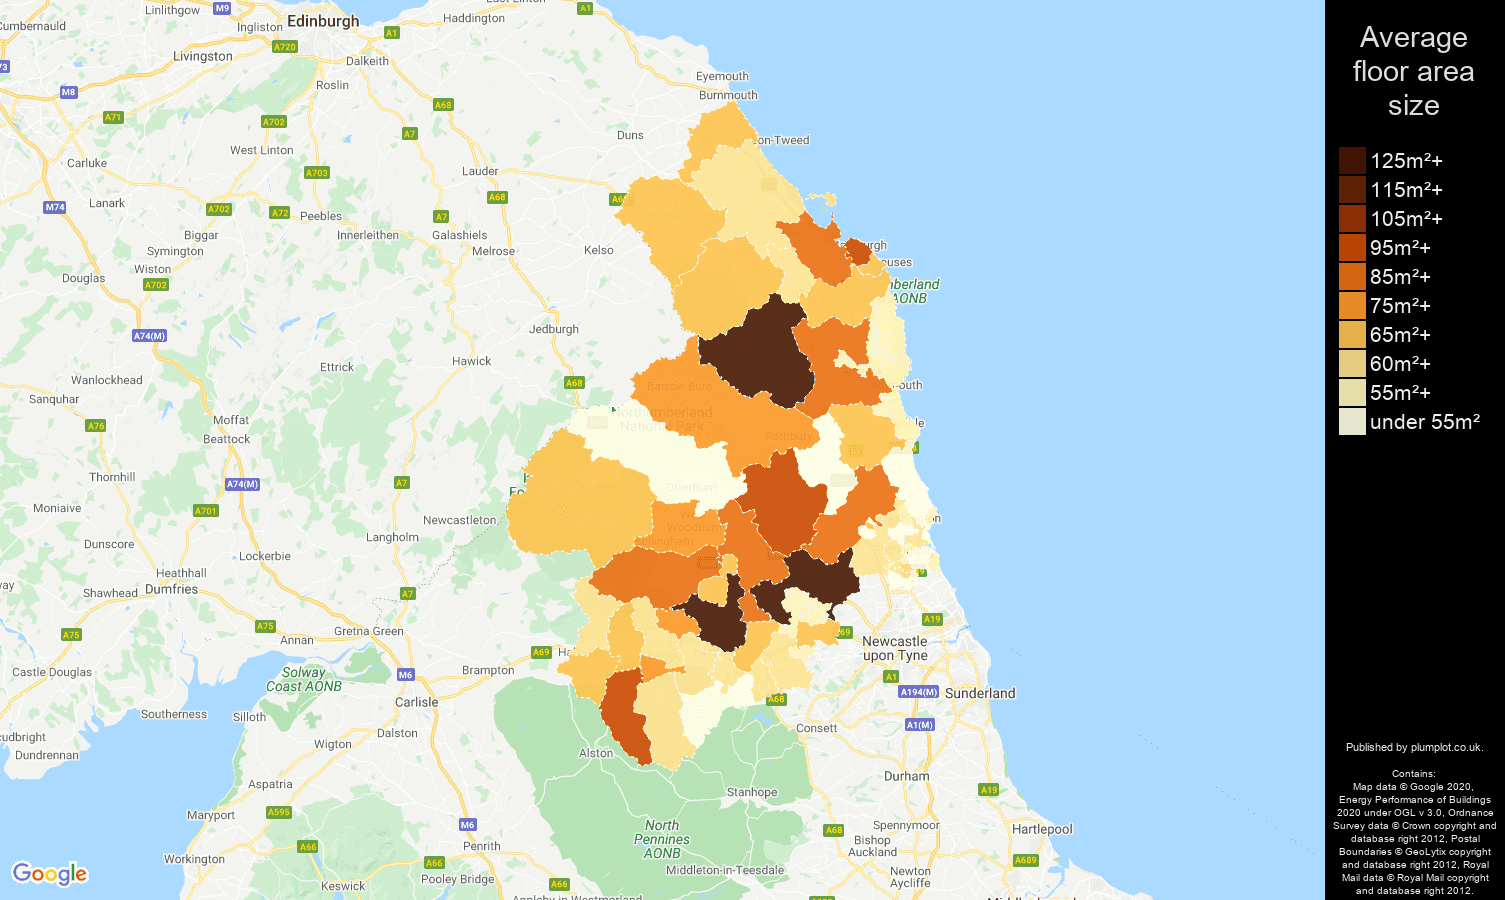 Northumberland map of average floor area size of flats